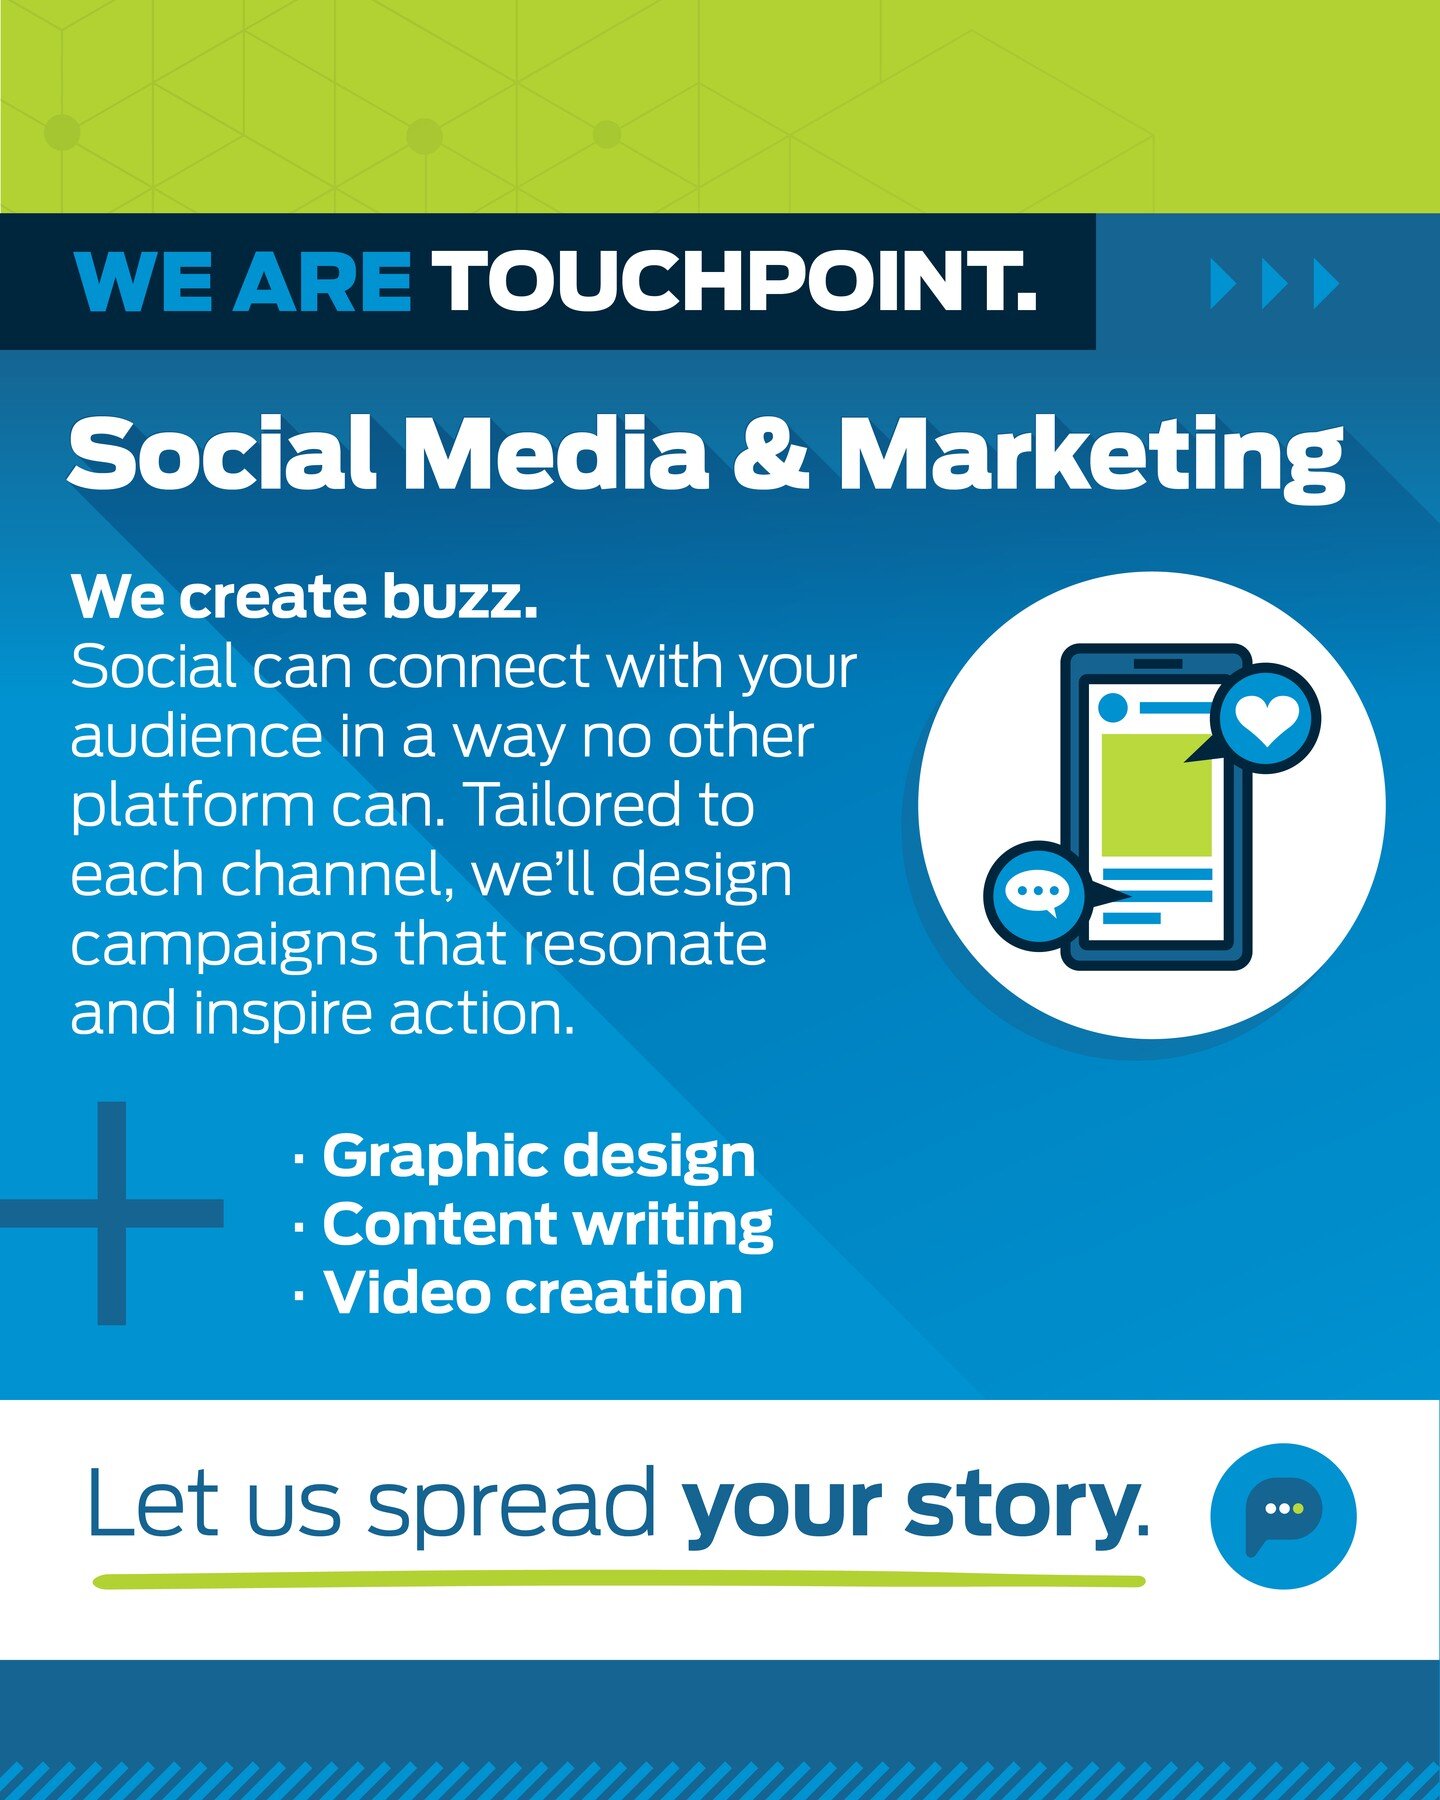 We create buzz. 
Social media can connect with your audience in a way no other platform can. Tailored to each channel, we'll design campaigns that resonate and inspire action. 

To check out the ways we engage in social media marketing, visit our web